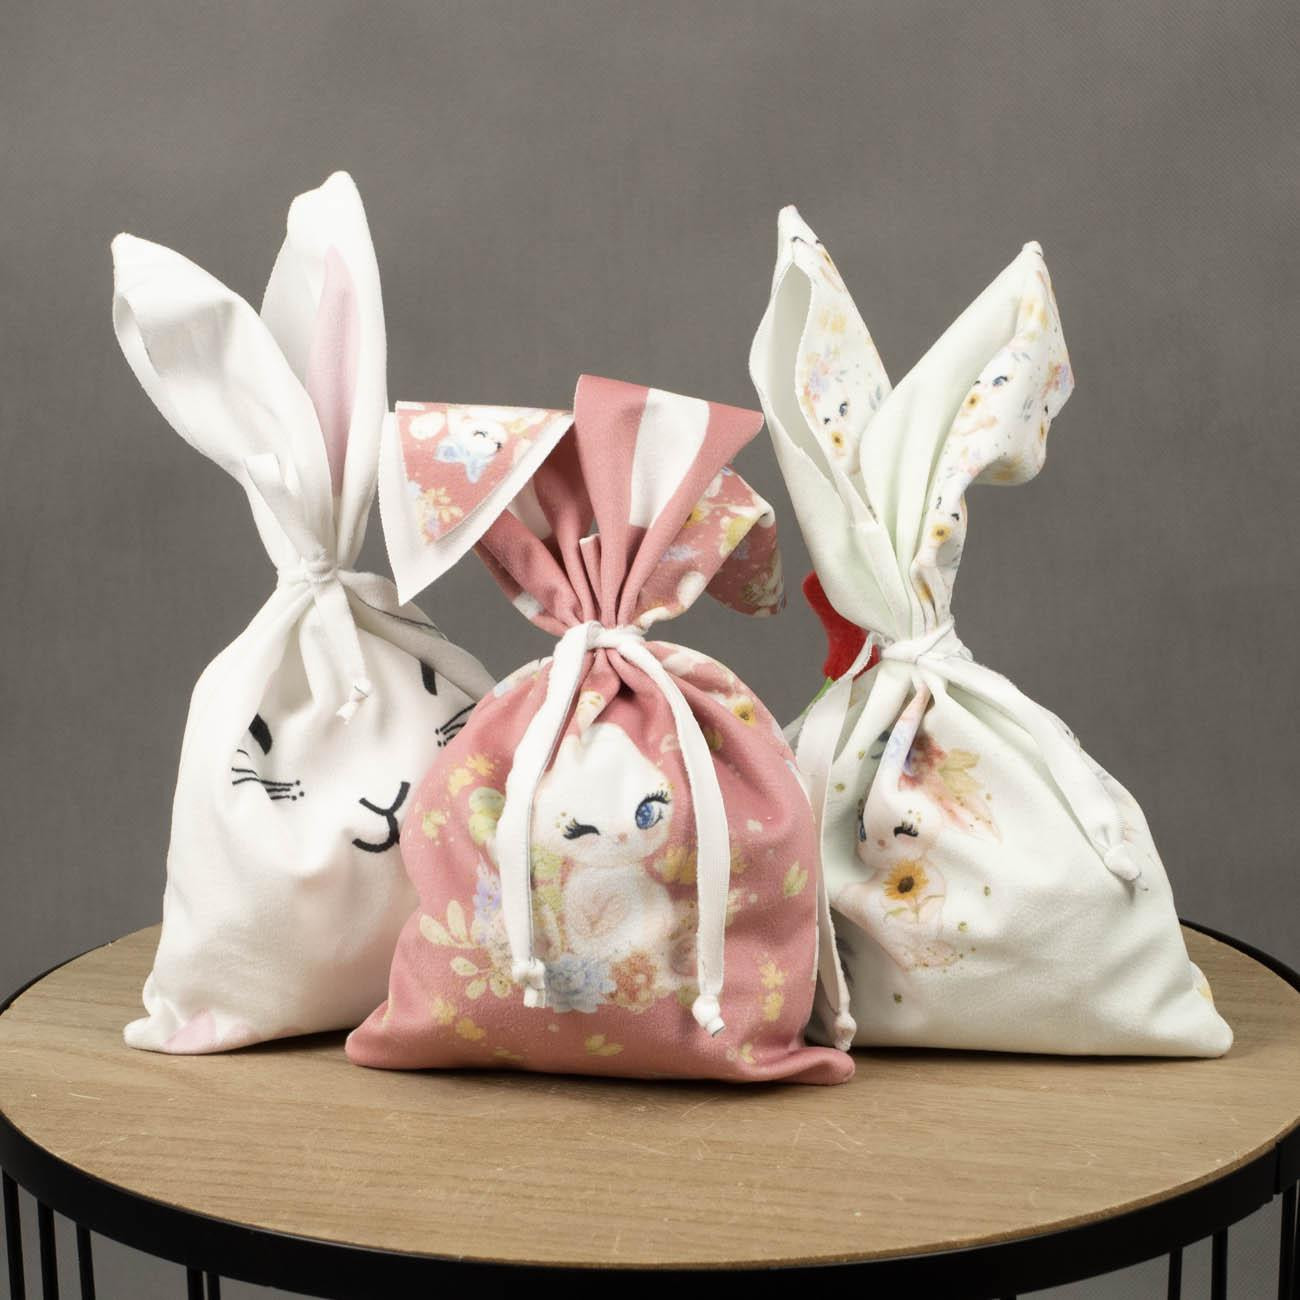 Gift pouches - BUNNIES IN BASKETS - sewing set